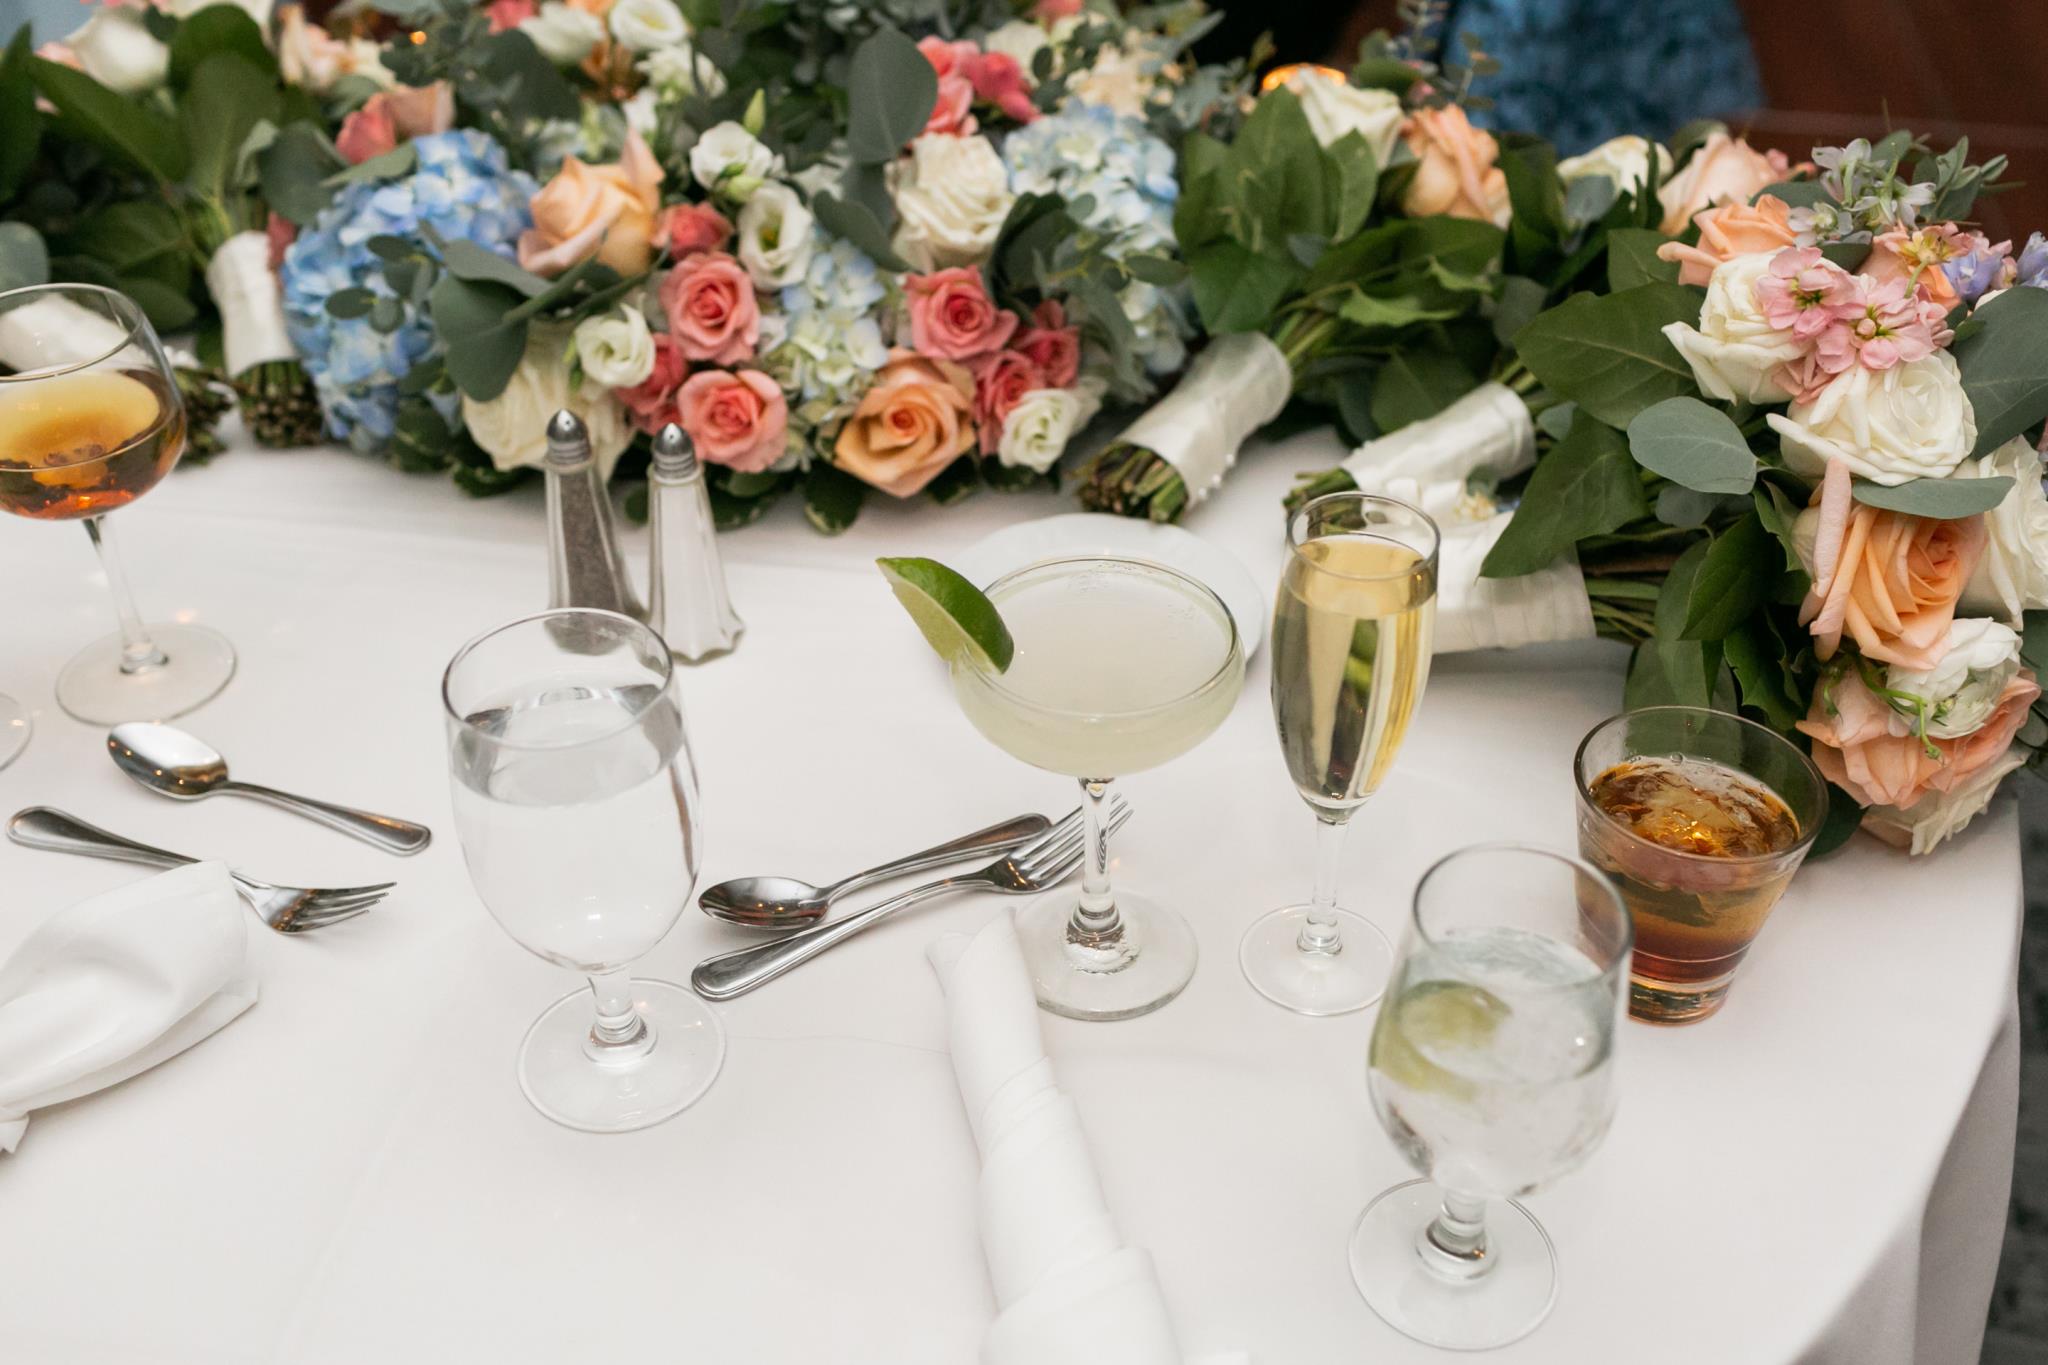 Wedding table setting with flowers and beverages